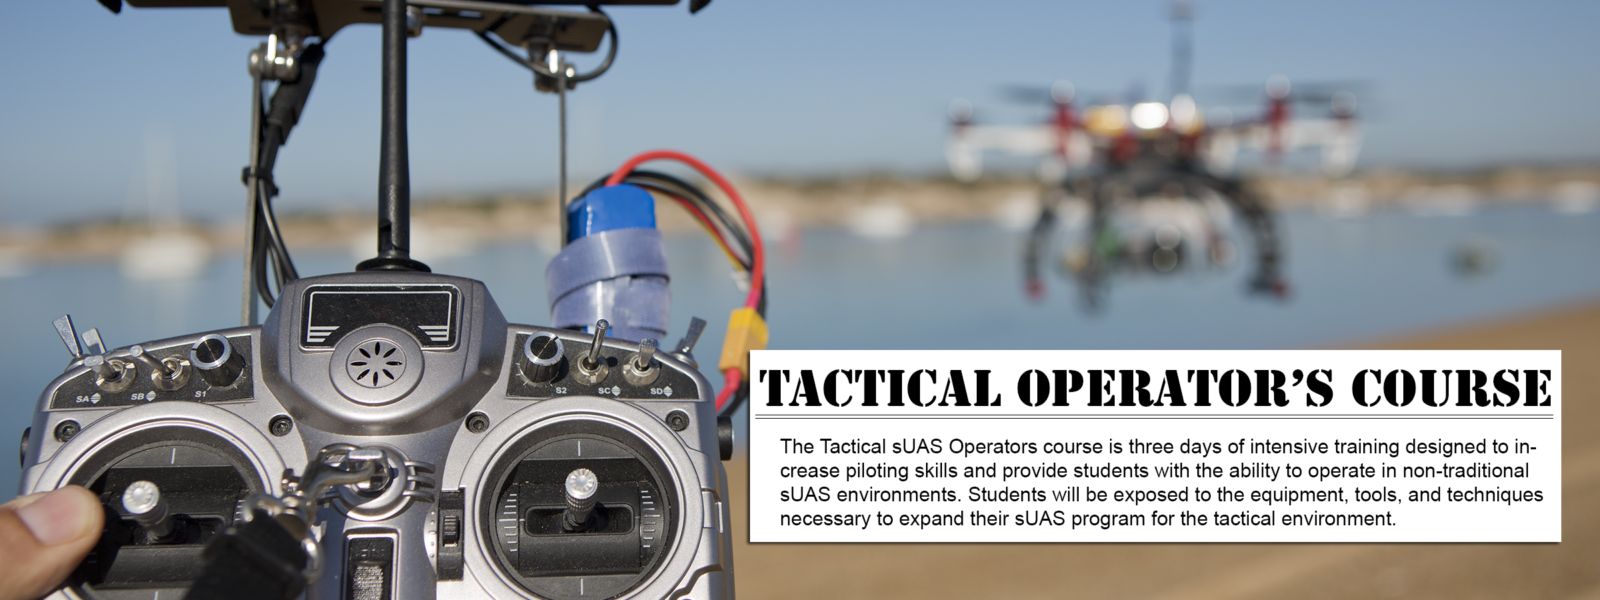 Tactical Operator’s Course